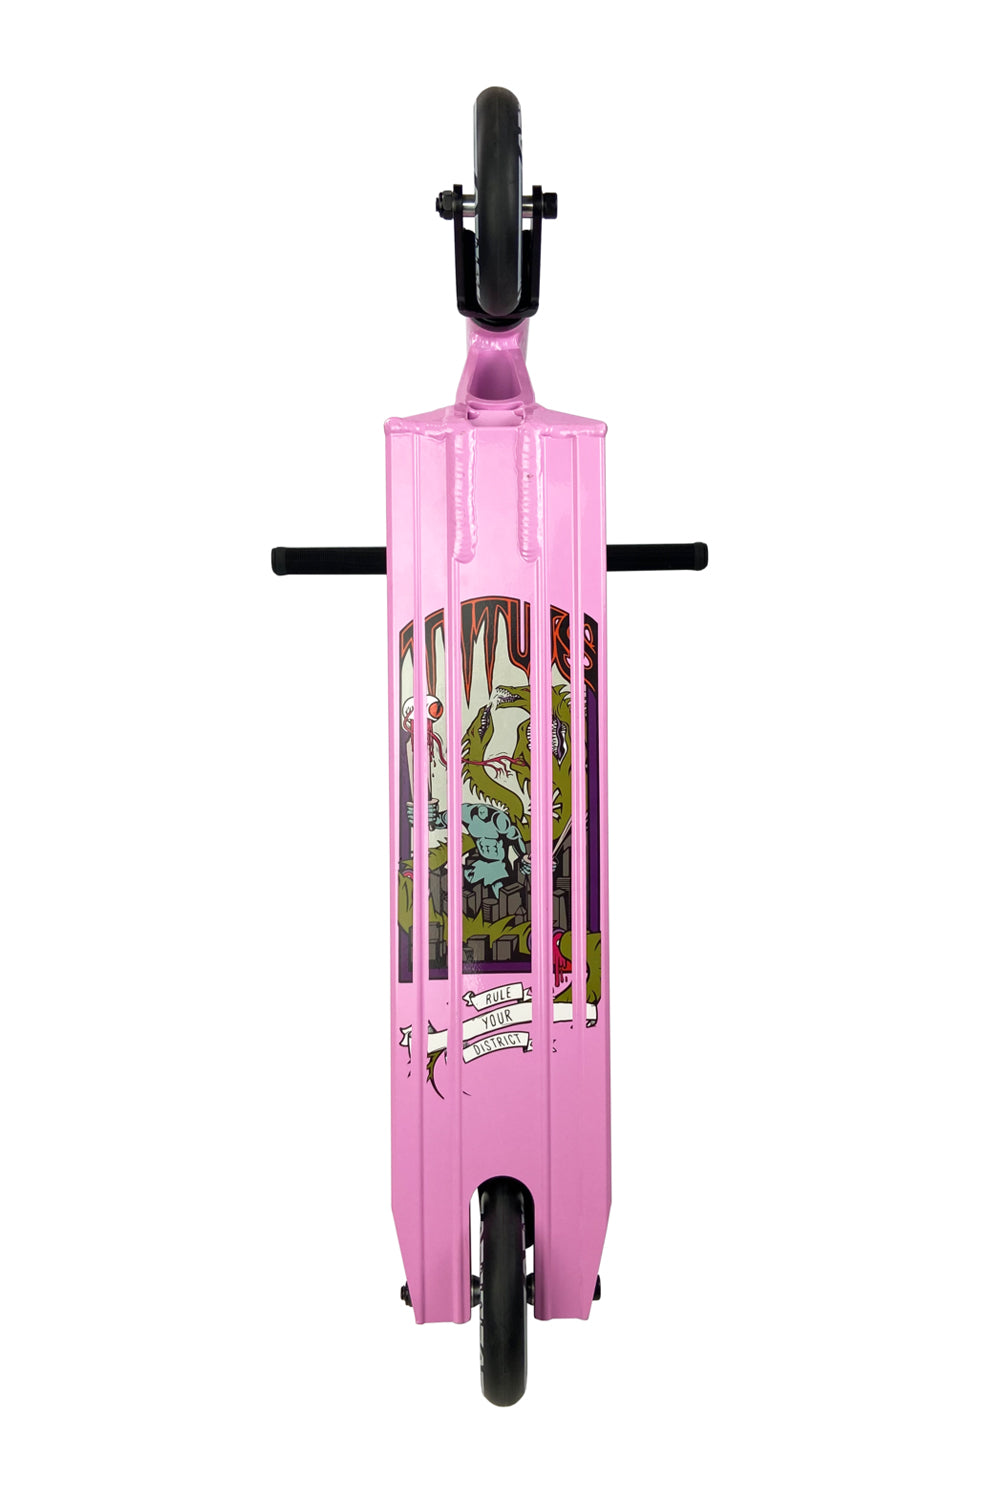 District Titus Complete - Powder Pink / Black - 110mm Wheels Scooter